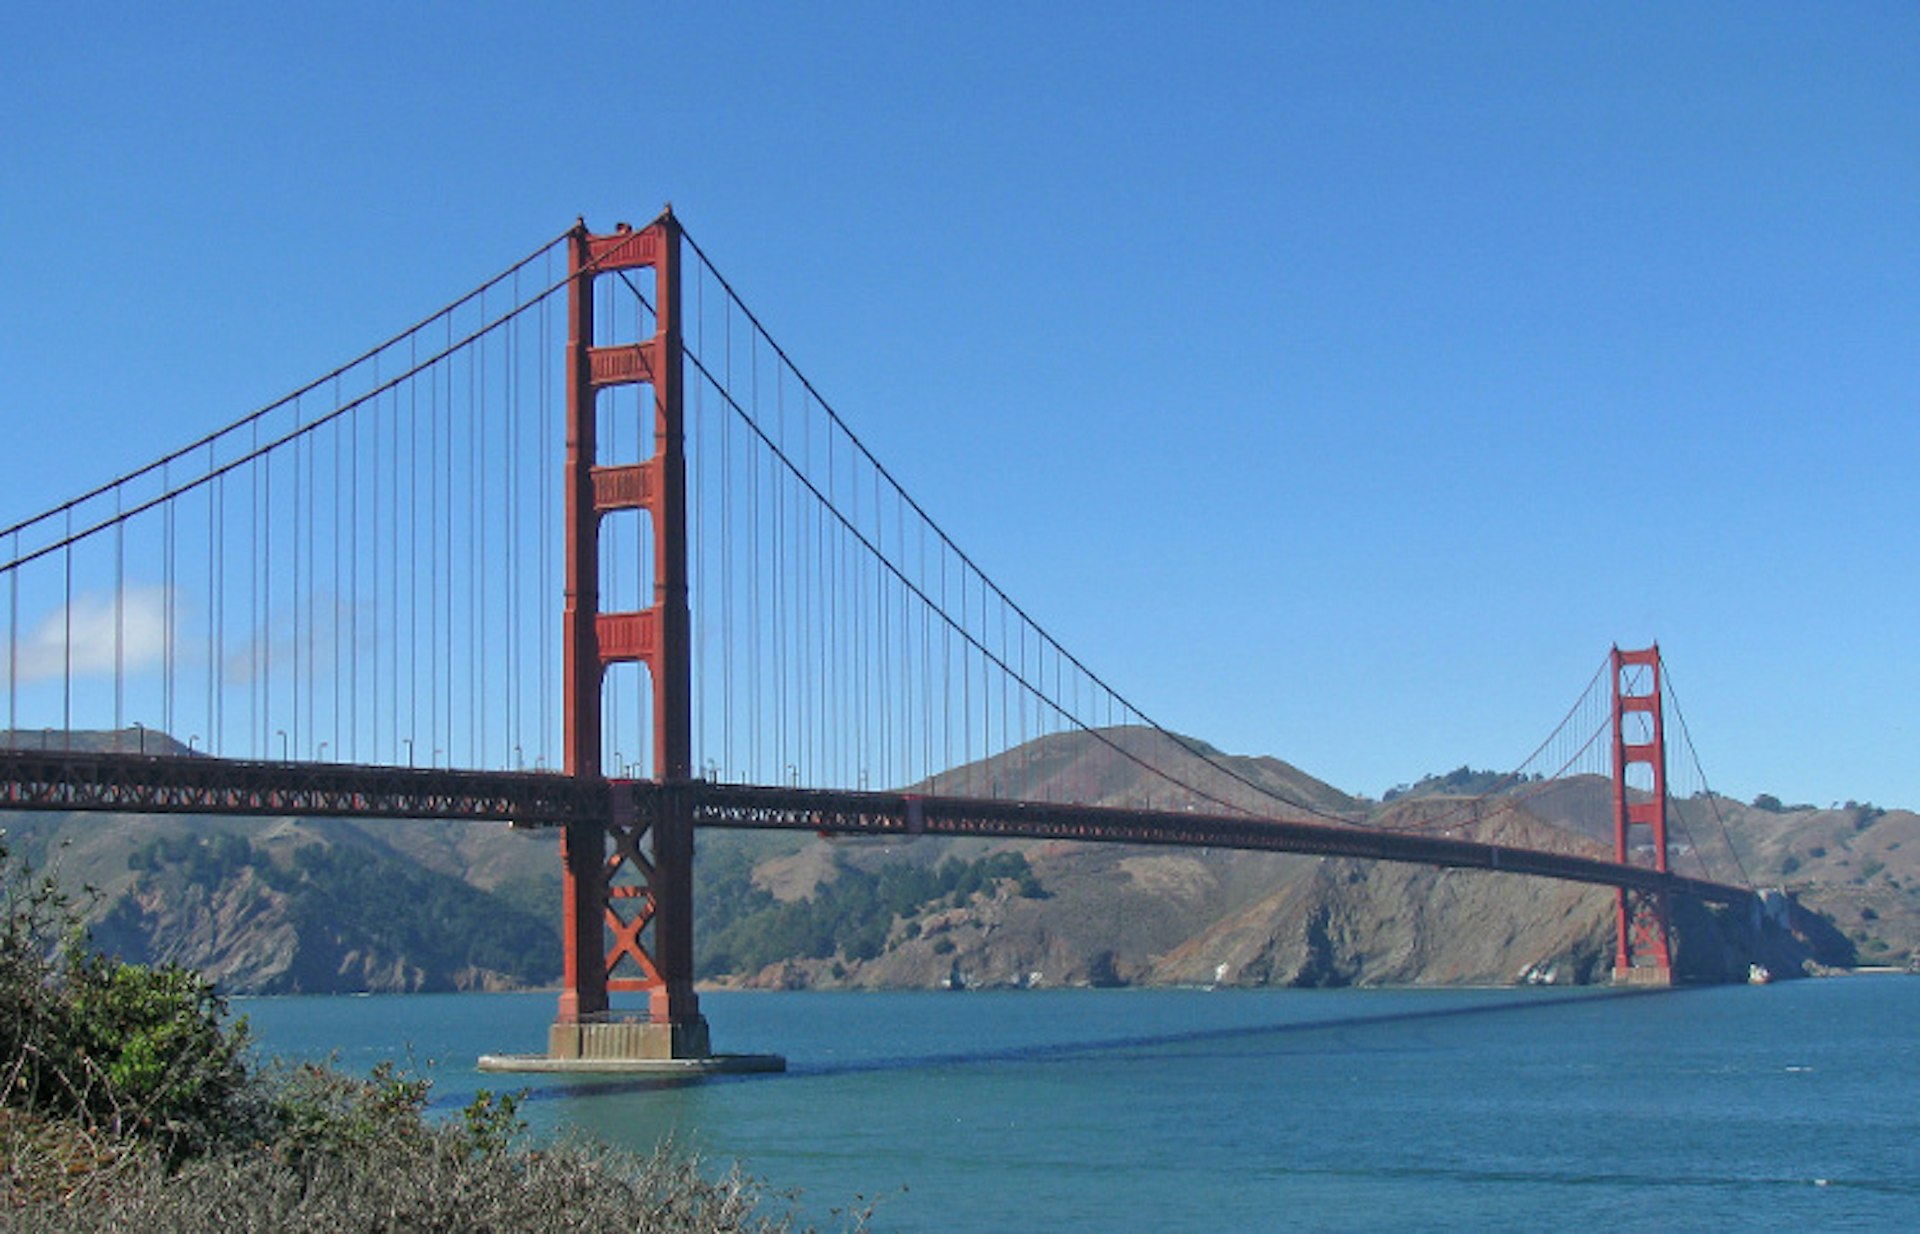 The Golden Gate Bridge. Image by jphilipg / CC BY 2.0